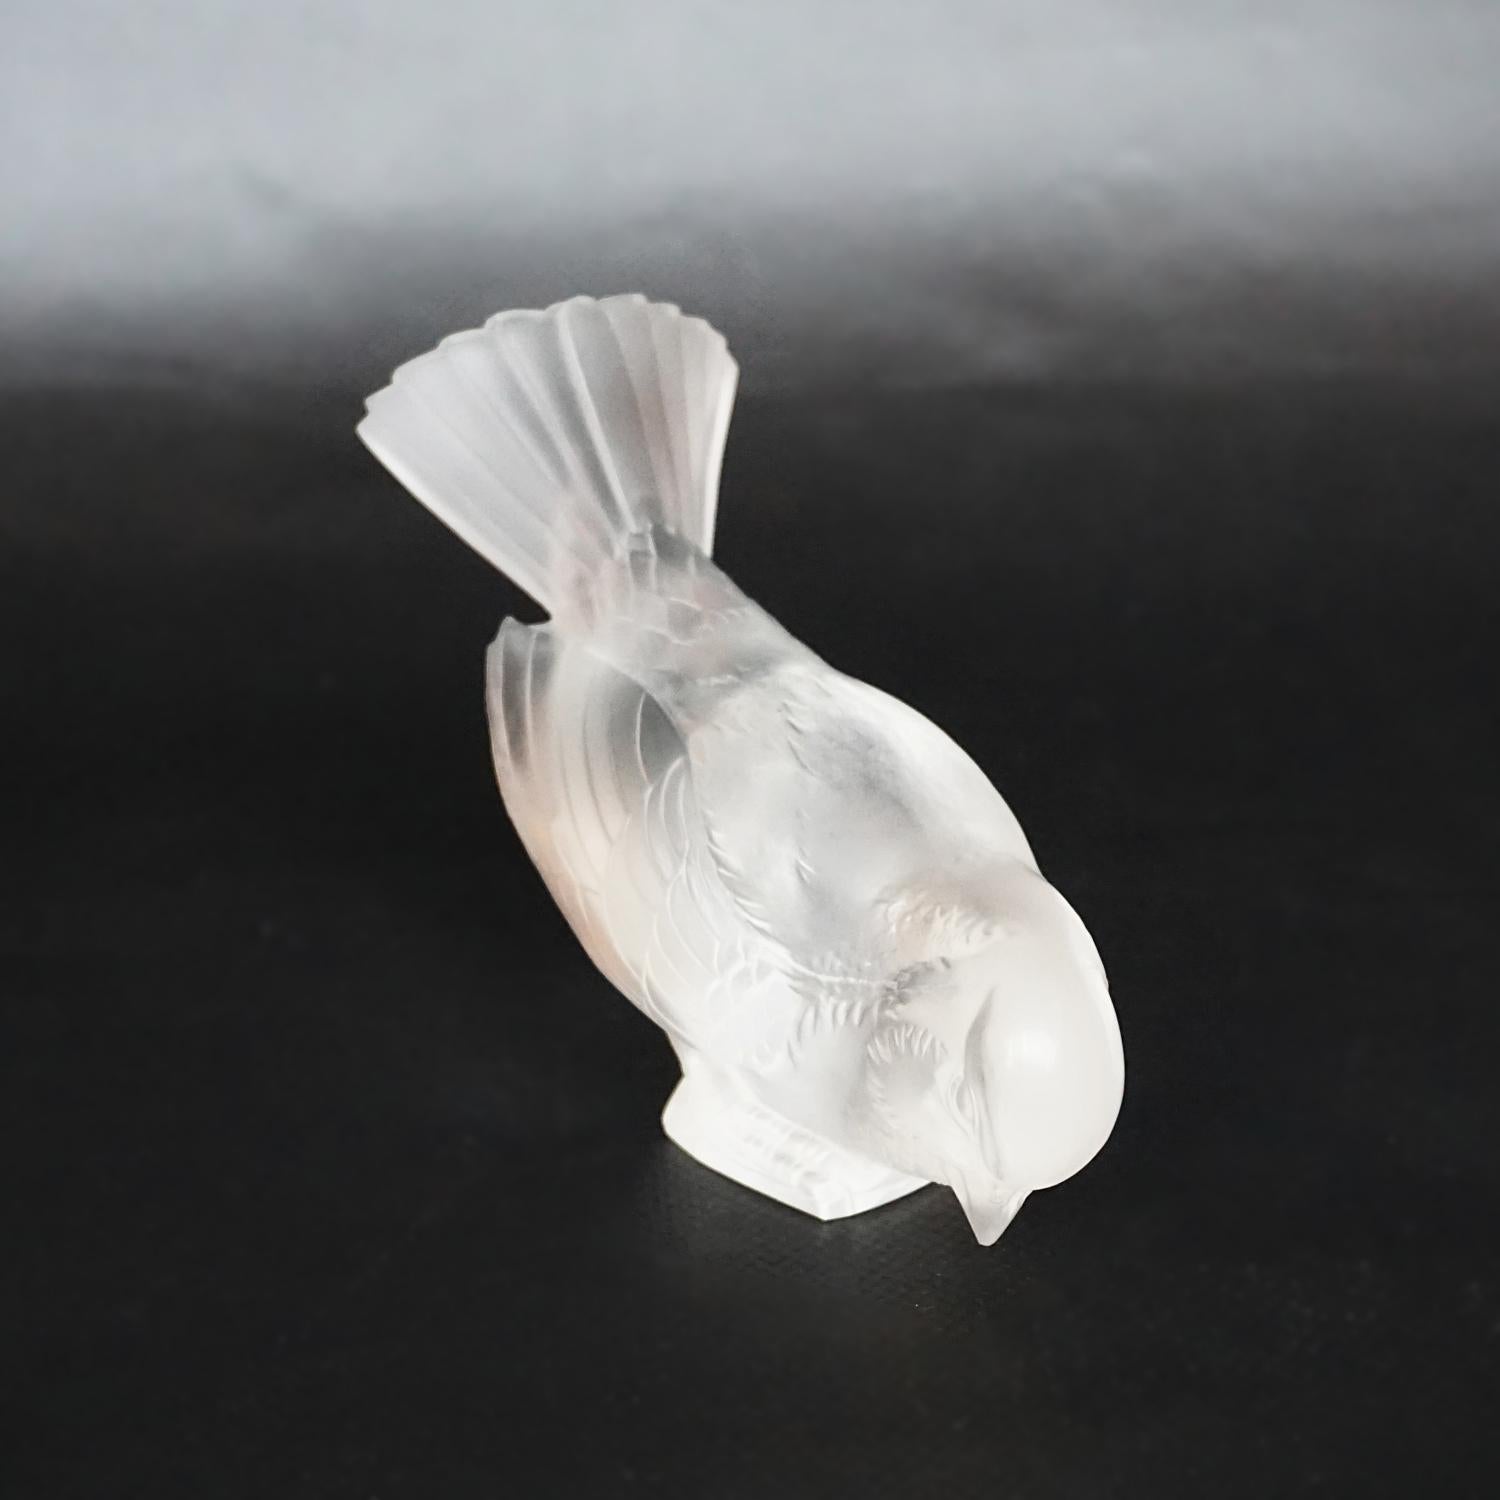 Moineau Hardi, an Art Deco glass bird paperweight by René Lalique (1860-1945). A frosted glass figure of a sparrow pecking for food. Model number 1150. Stencil etched R Lalique France to underside. 

Literature: Marcilhac, R Lalique Catalogue